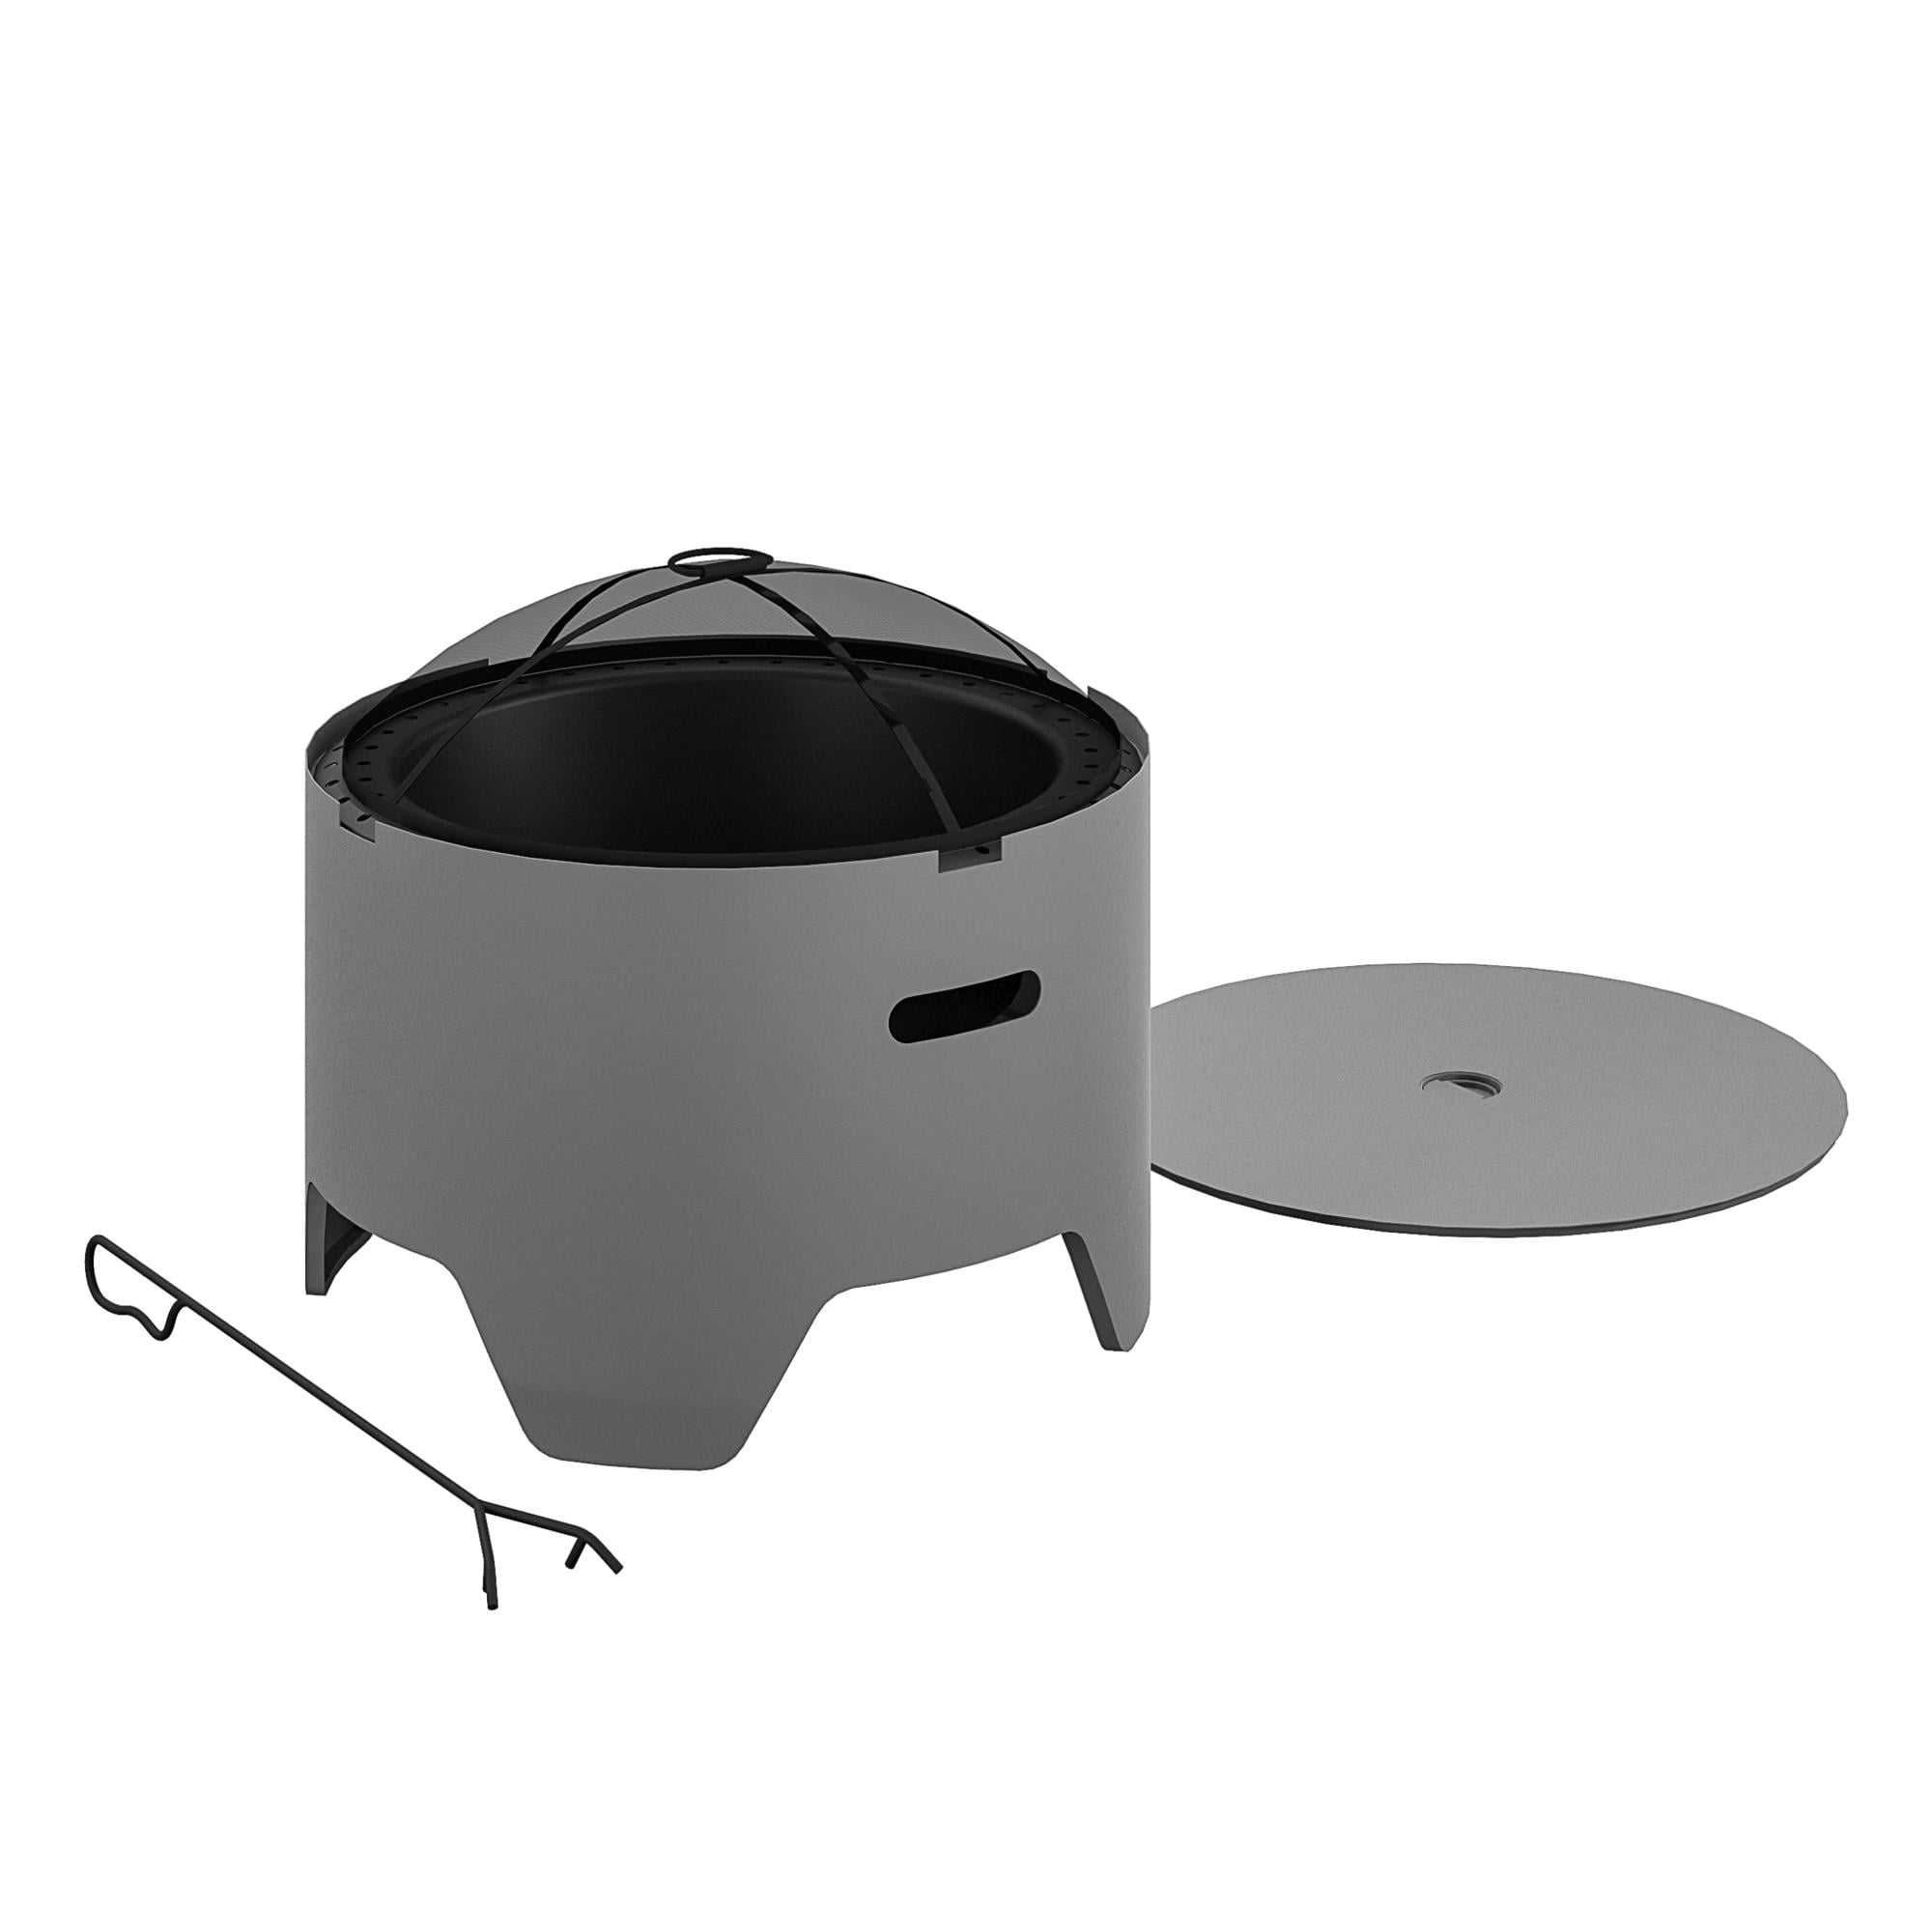 COSCO Outdoor 23" Round Wood Burning Fire Pit with Rain Cover and Accessories, Steel, Gray